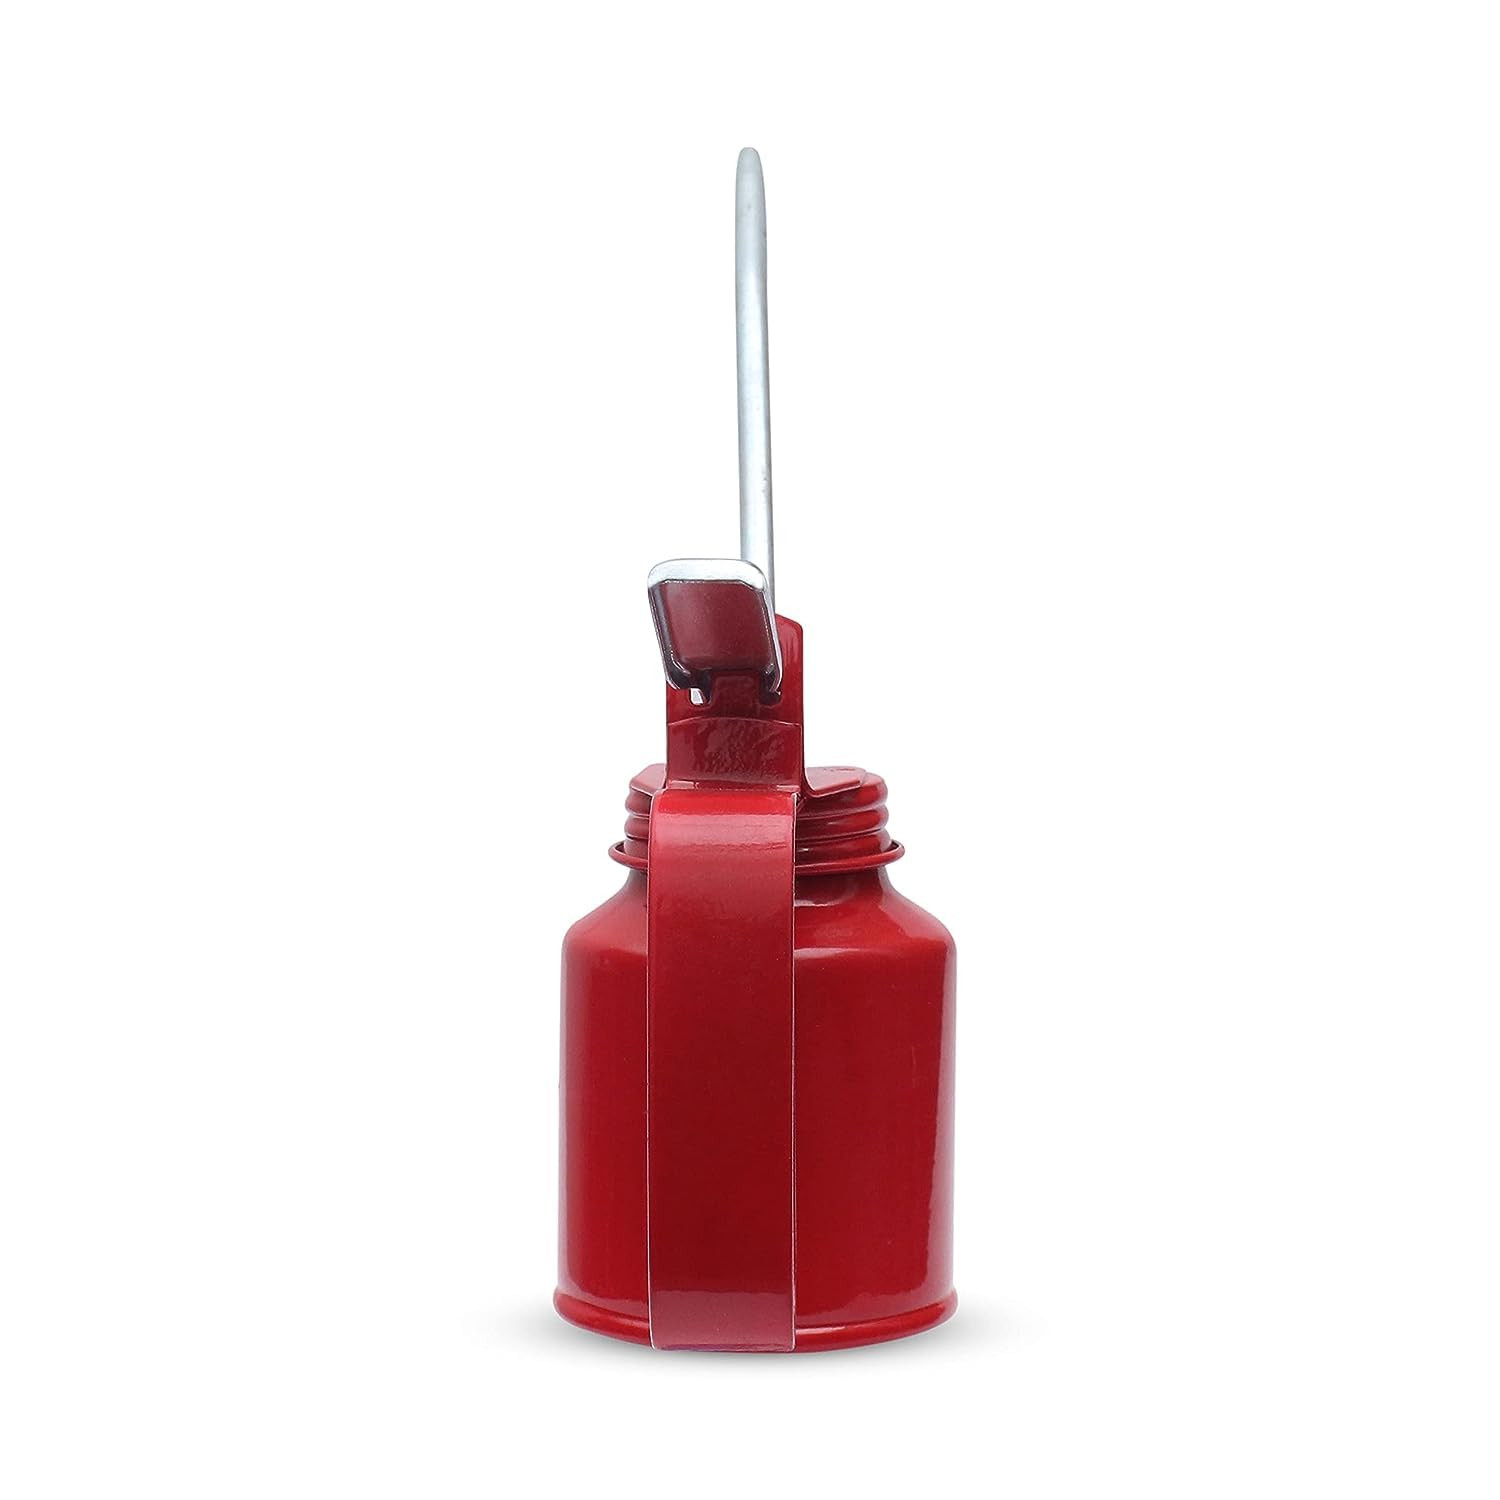 Kuber Industries Lubricant Dispenser|Pint Oil Can|Oil Can for Vehicles|Oil CanPump Oiler with Fixed Spout| All Lubrication Need (Red)